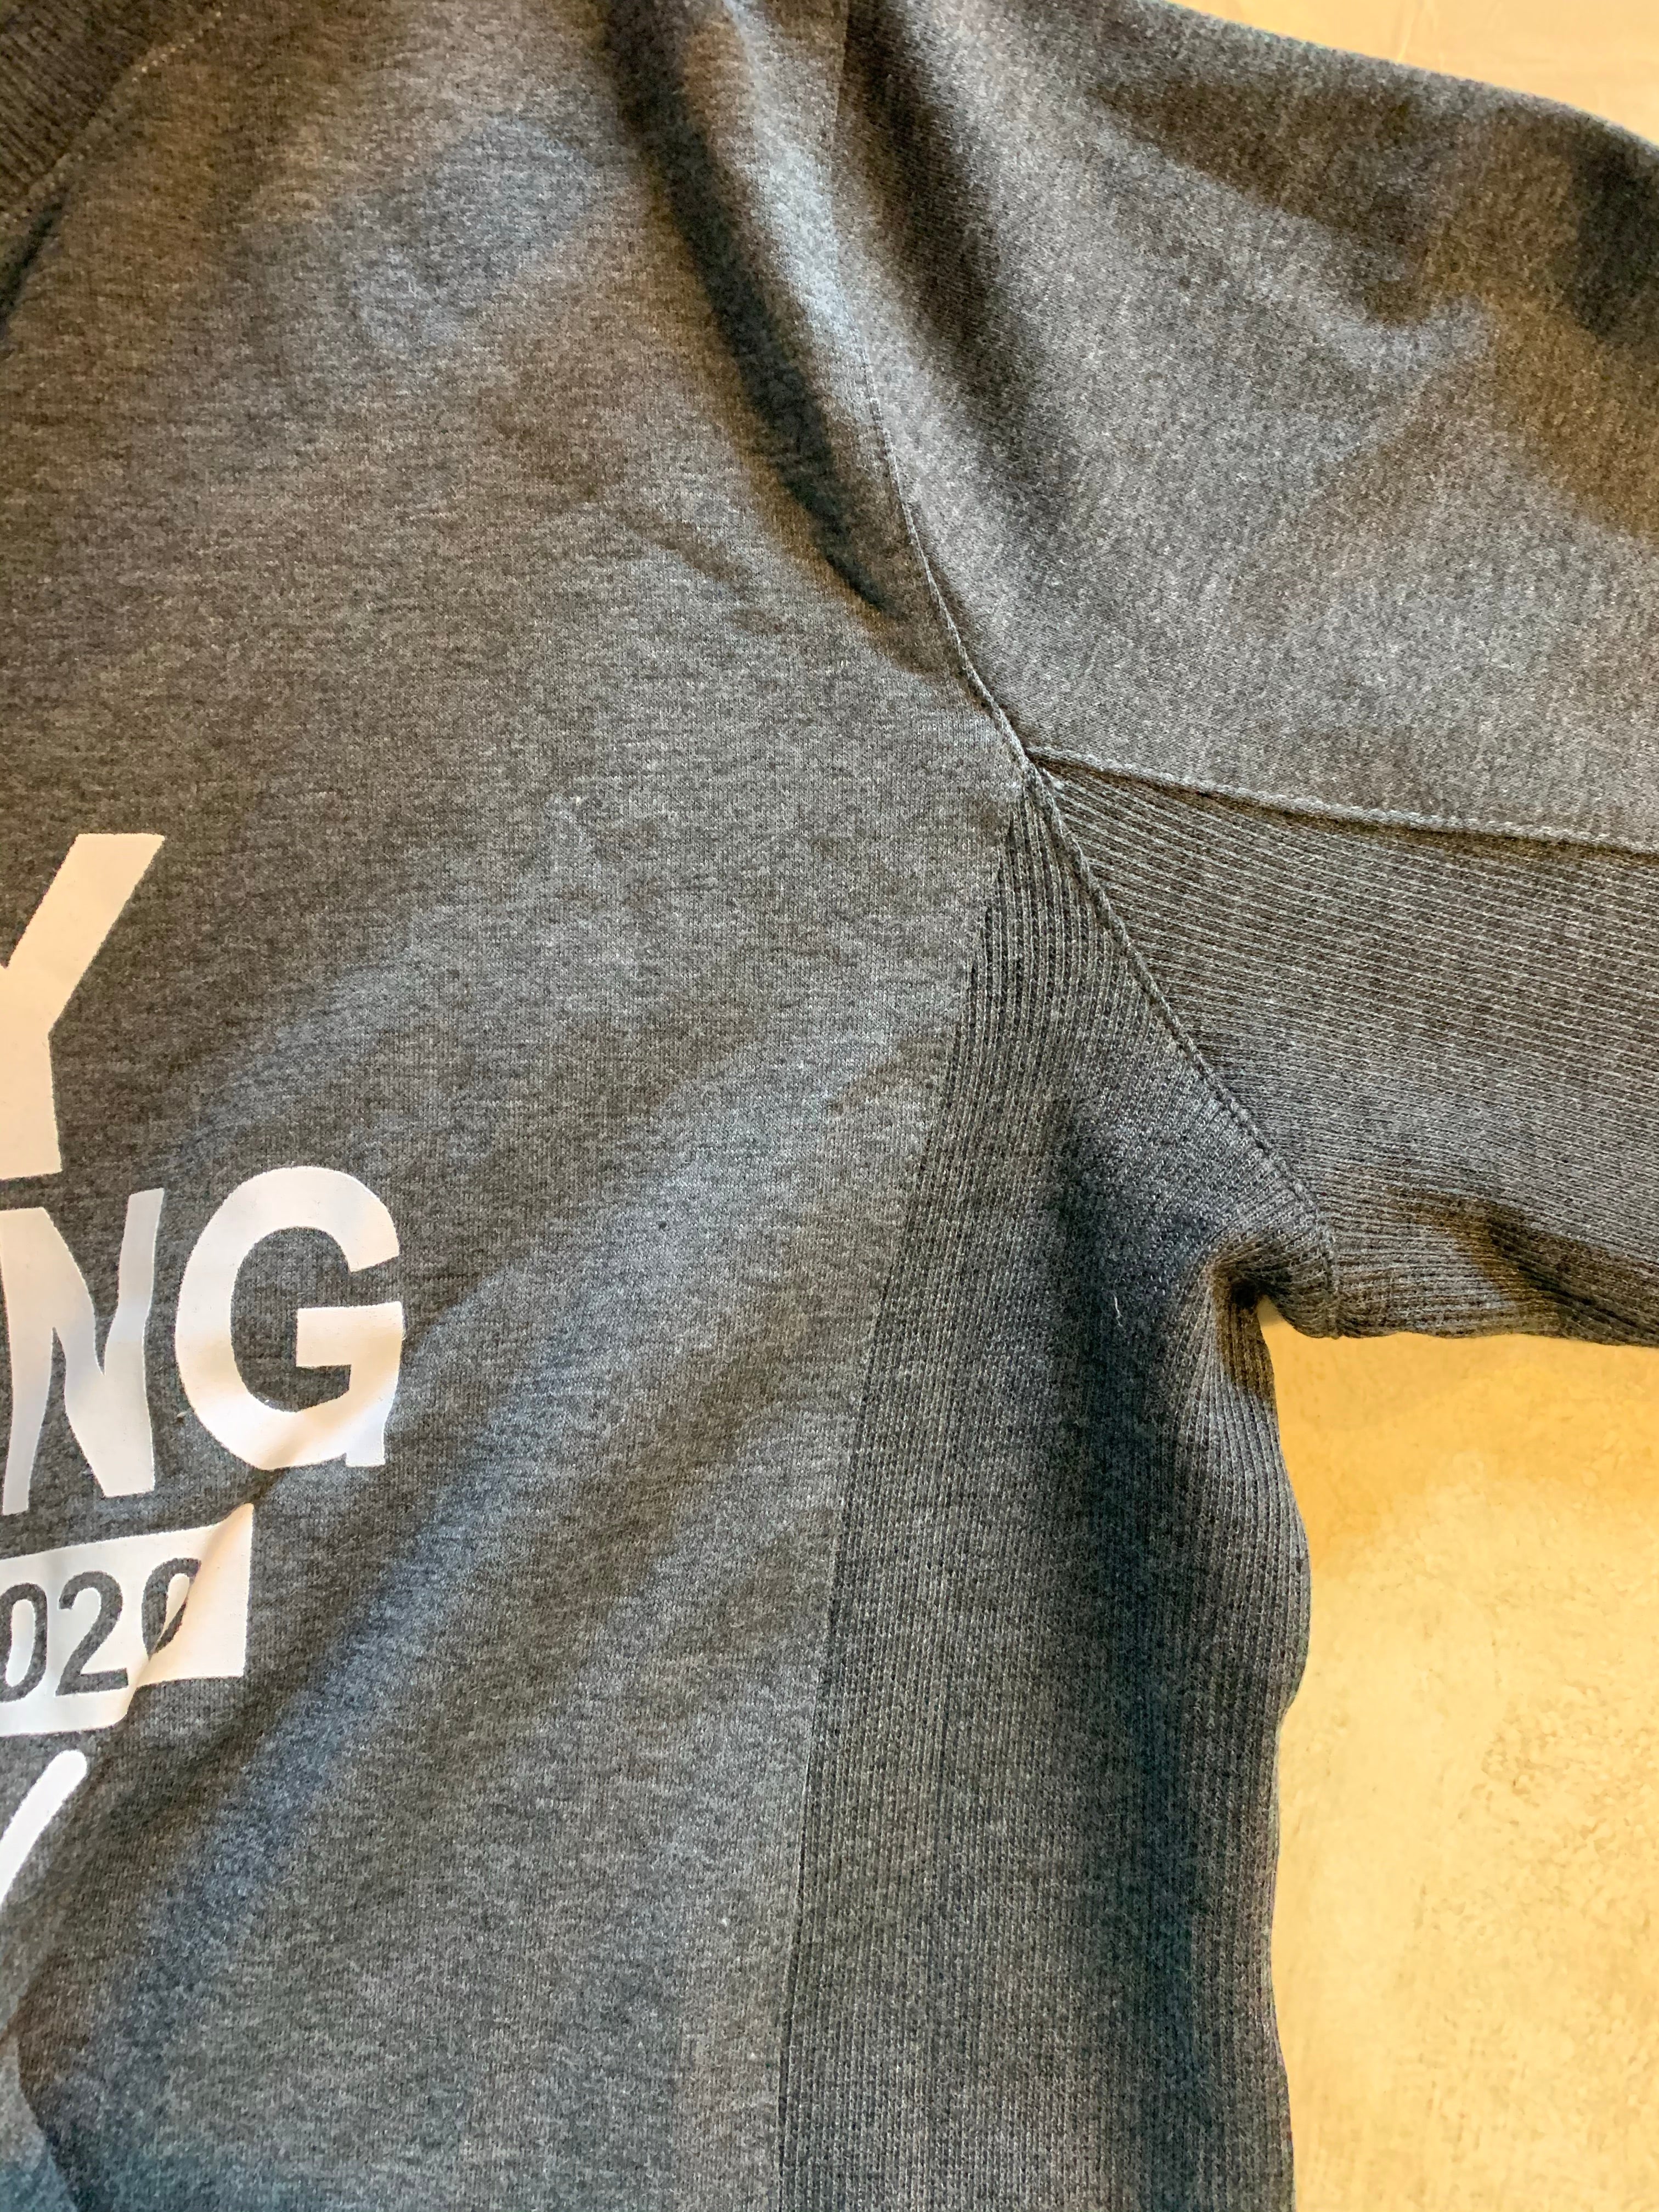 Charcoal “Day Drinking” Long Sleeve Cotton Knit Tee